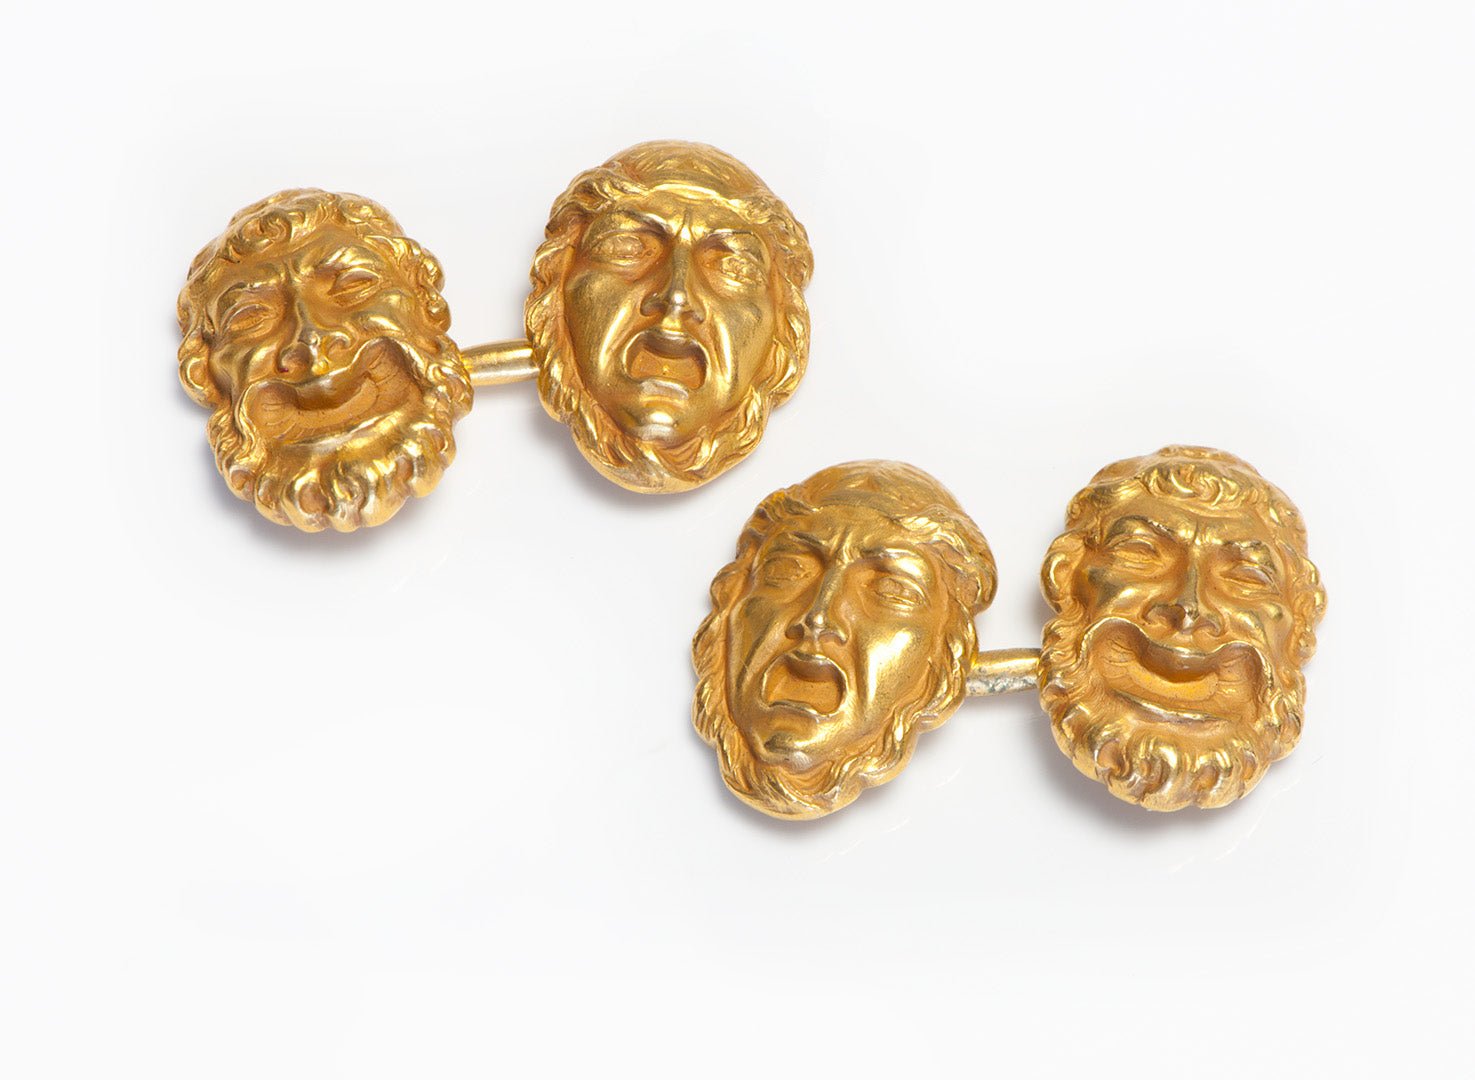 Frank Walter Lawrence Art Nouveau Gold Mythological Cufflinks - DSF Antique Jewelry